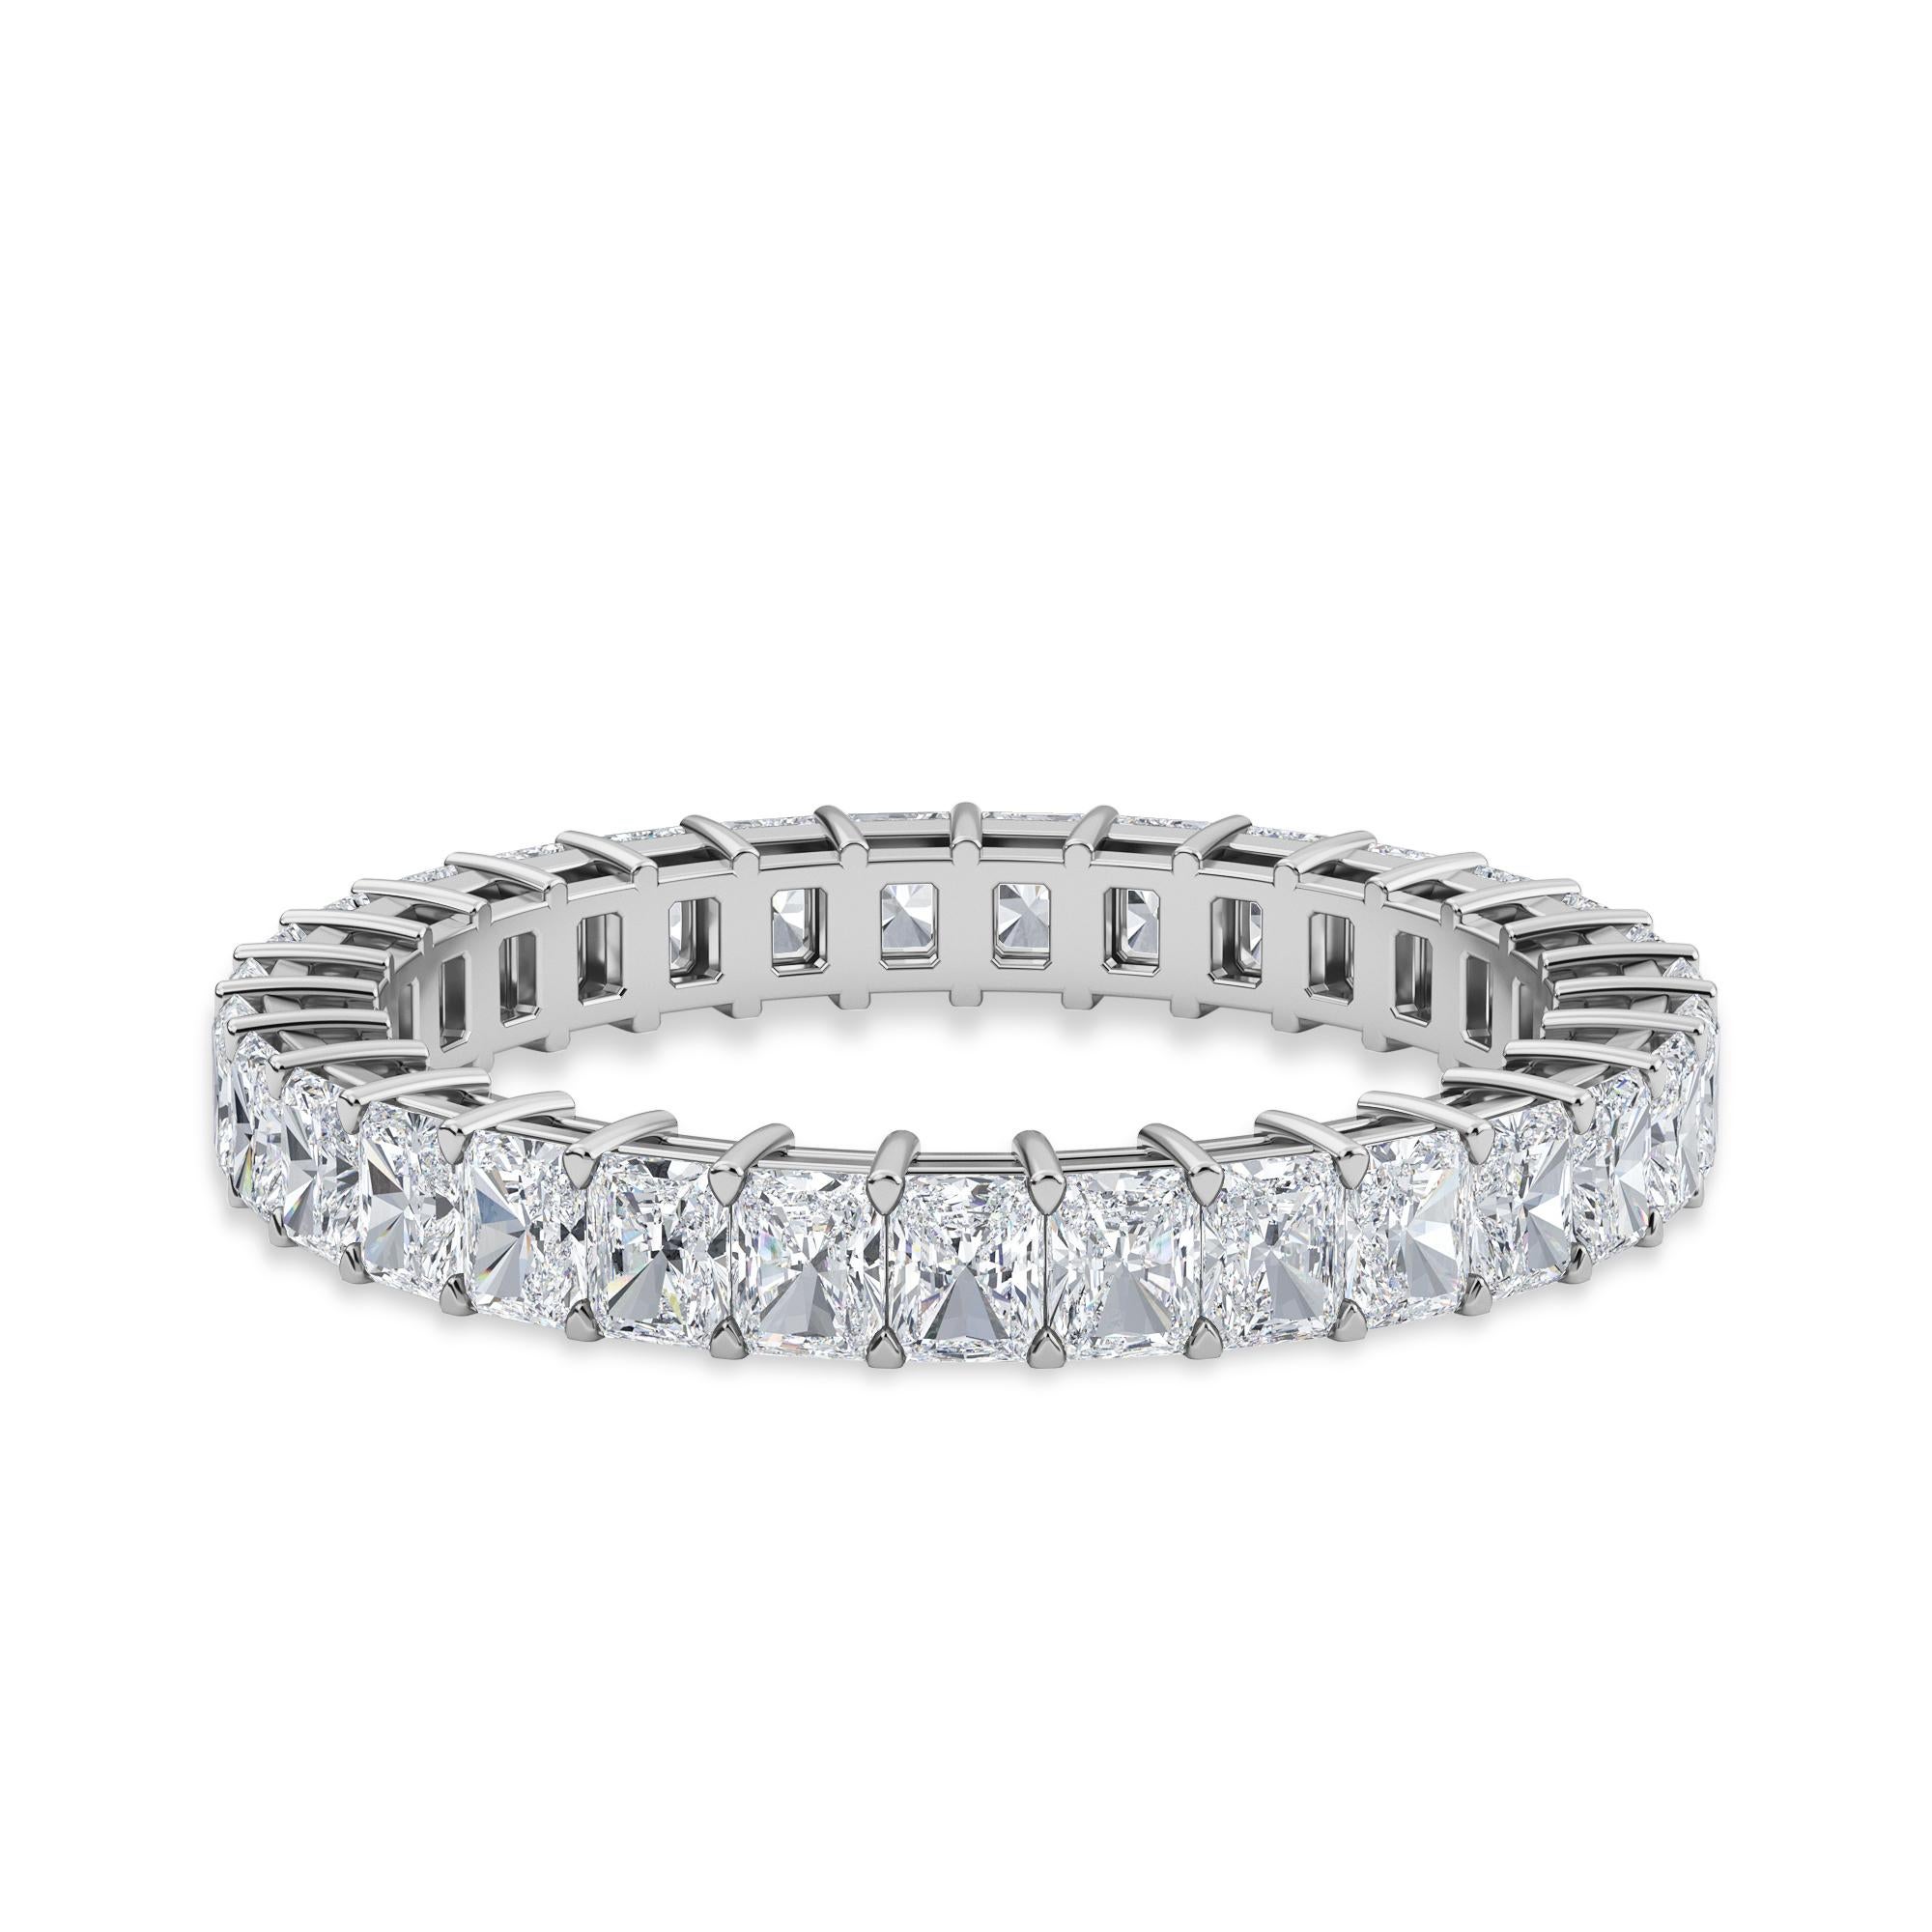 This ring has 31 Cushion Diamonds. The ring has a total carat weight of 1.92.
The diamonds are F color VS clarity. The ring is a finger size 6.25 and is set in platinum.